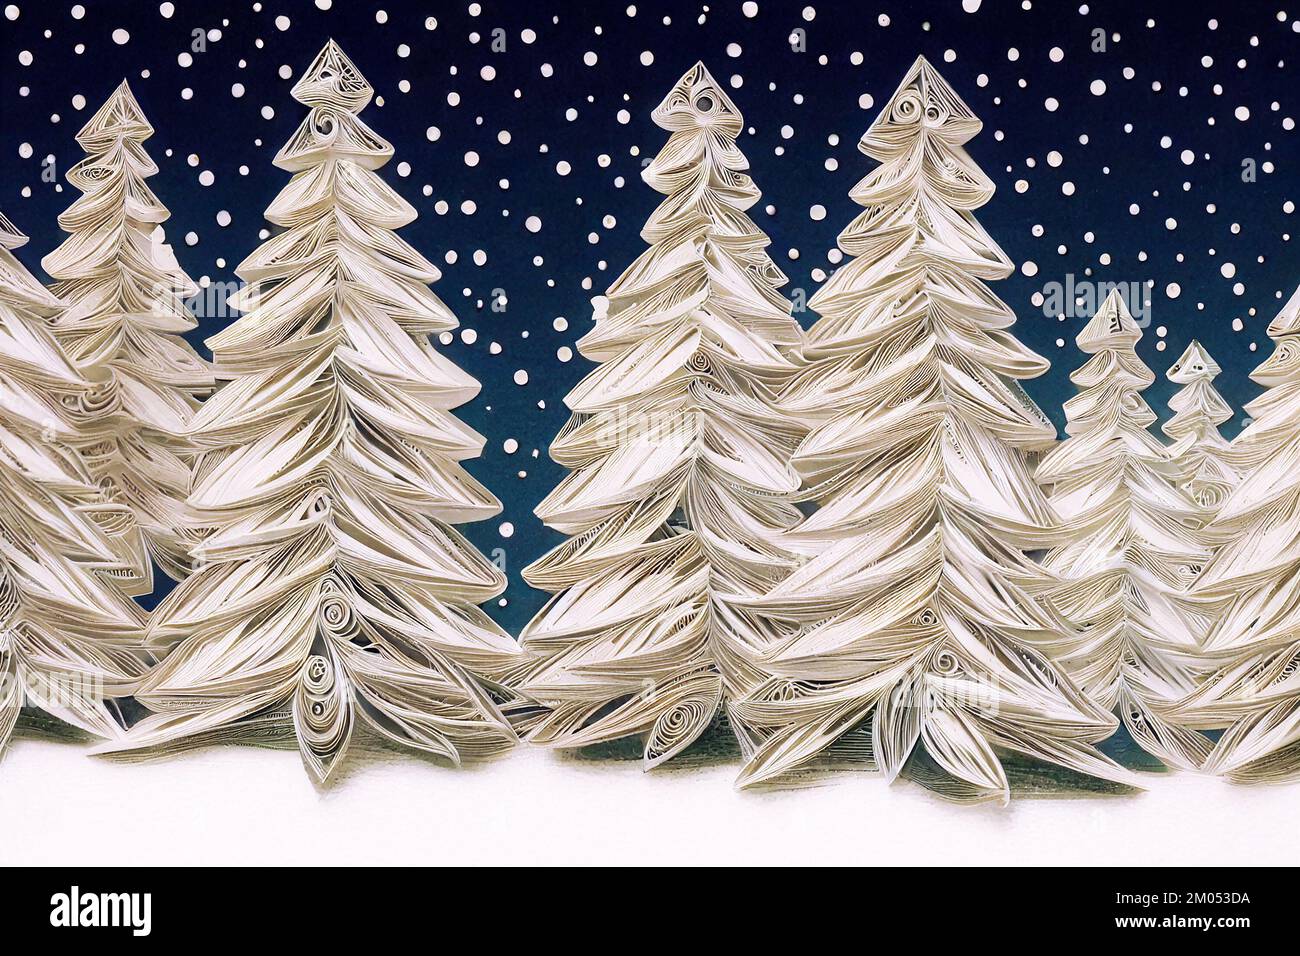 paper quilling winter landscape of white christmas trees and snow Stock Photo